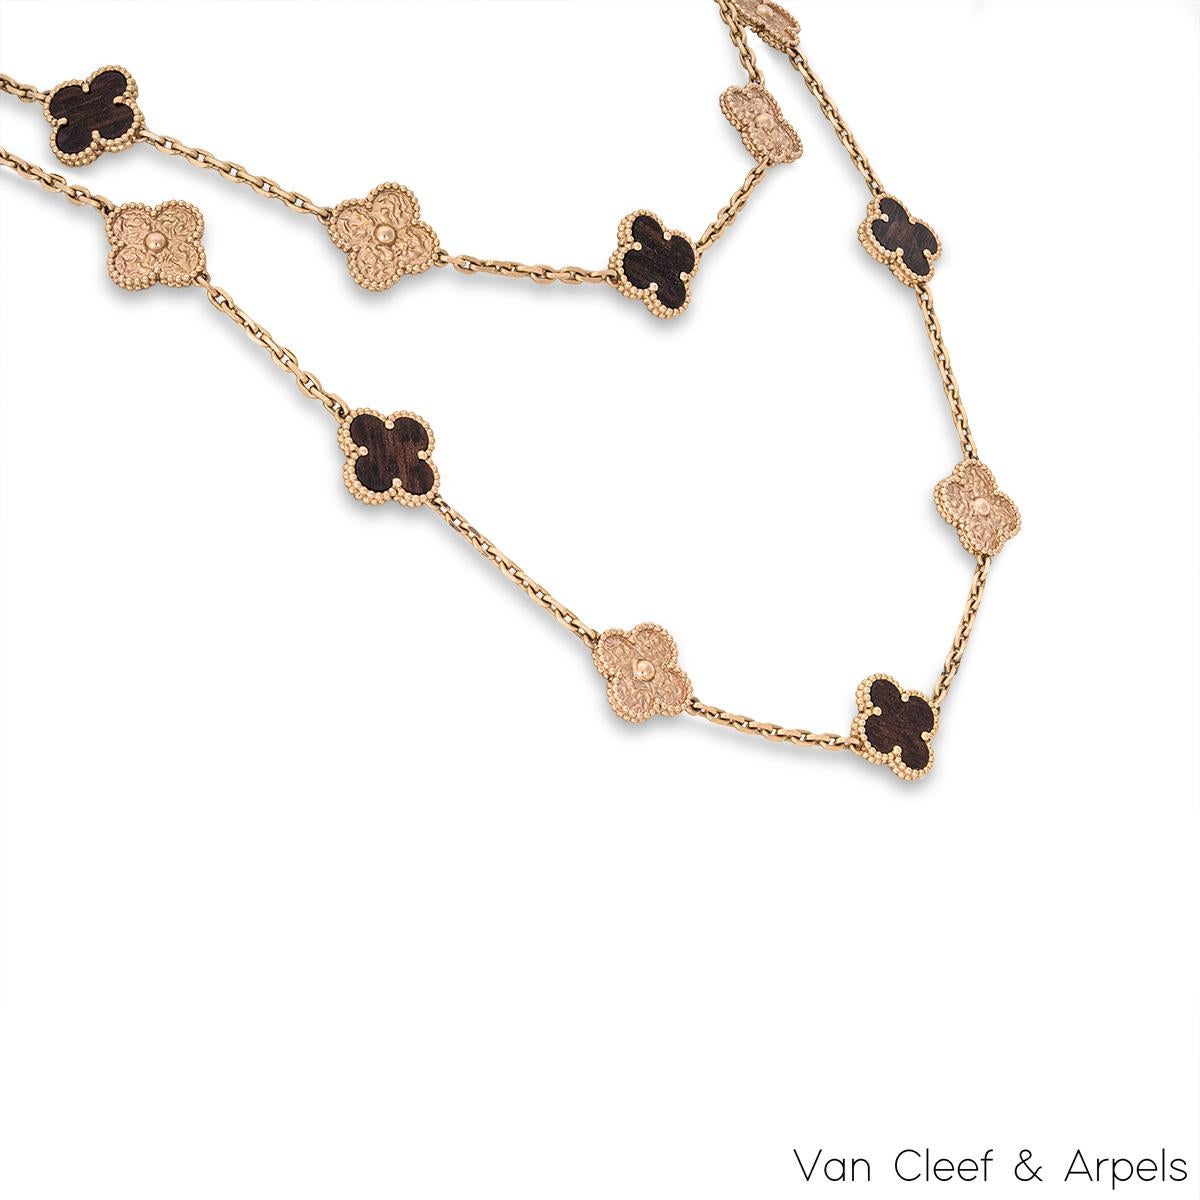 A limited edition 18k rose gold letterwood necklace by Van Cleef and Arpels from the Vintage Alhambra collection. The 20 motif necklace alternates between 10 textured clover motifs and 10 letterwood clover motifs, each set with a beaded edge. The